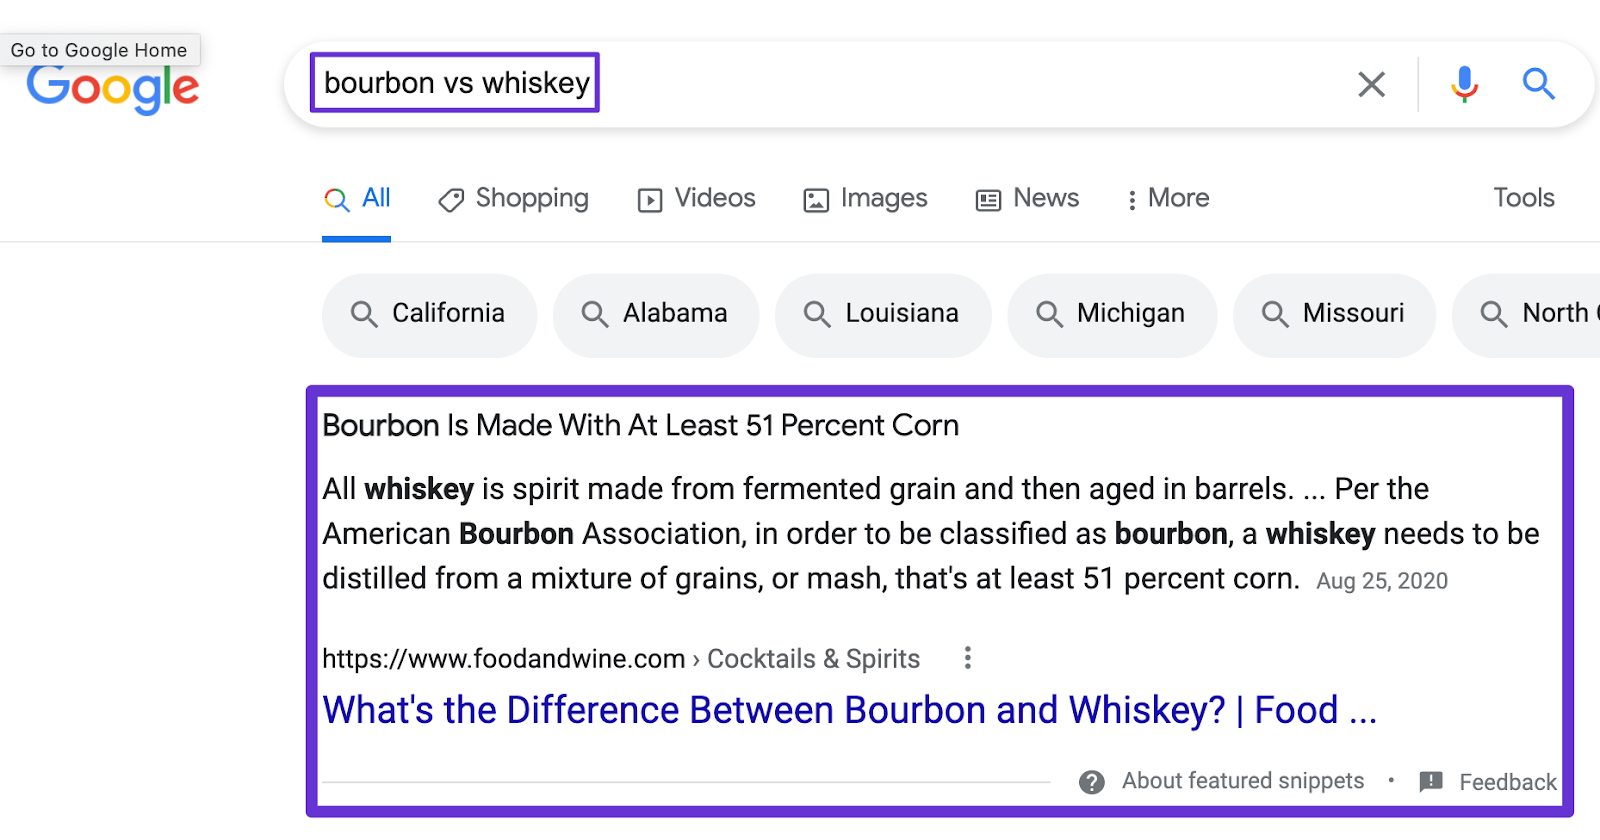 bourbon vs whiskey featured snippet paragraph